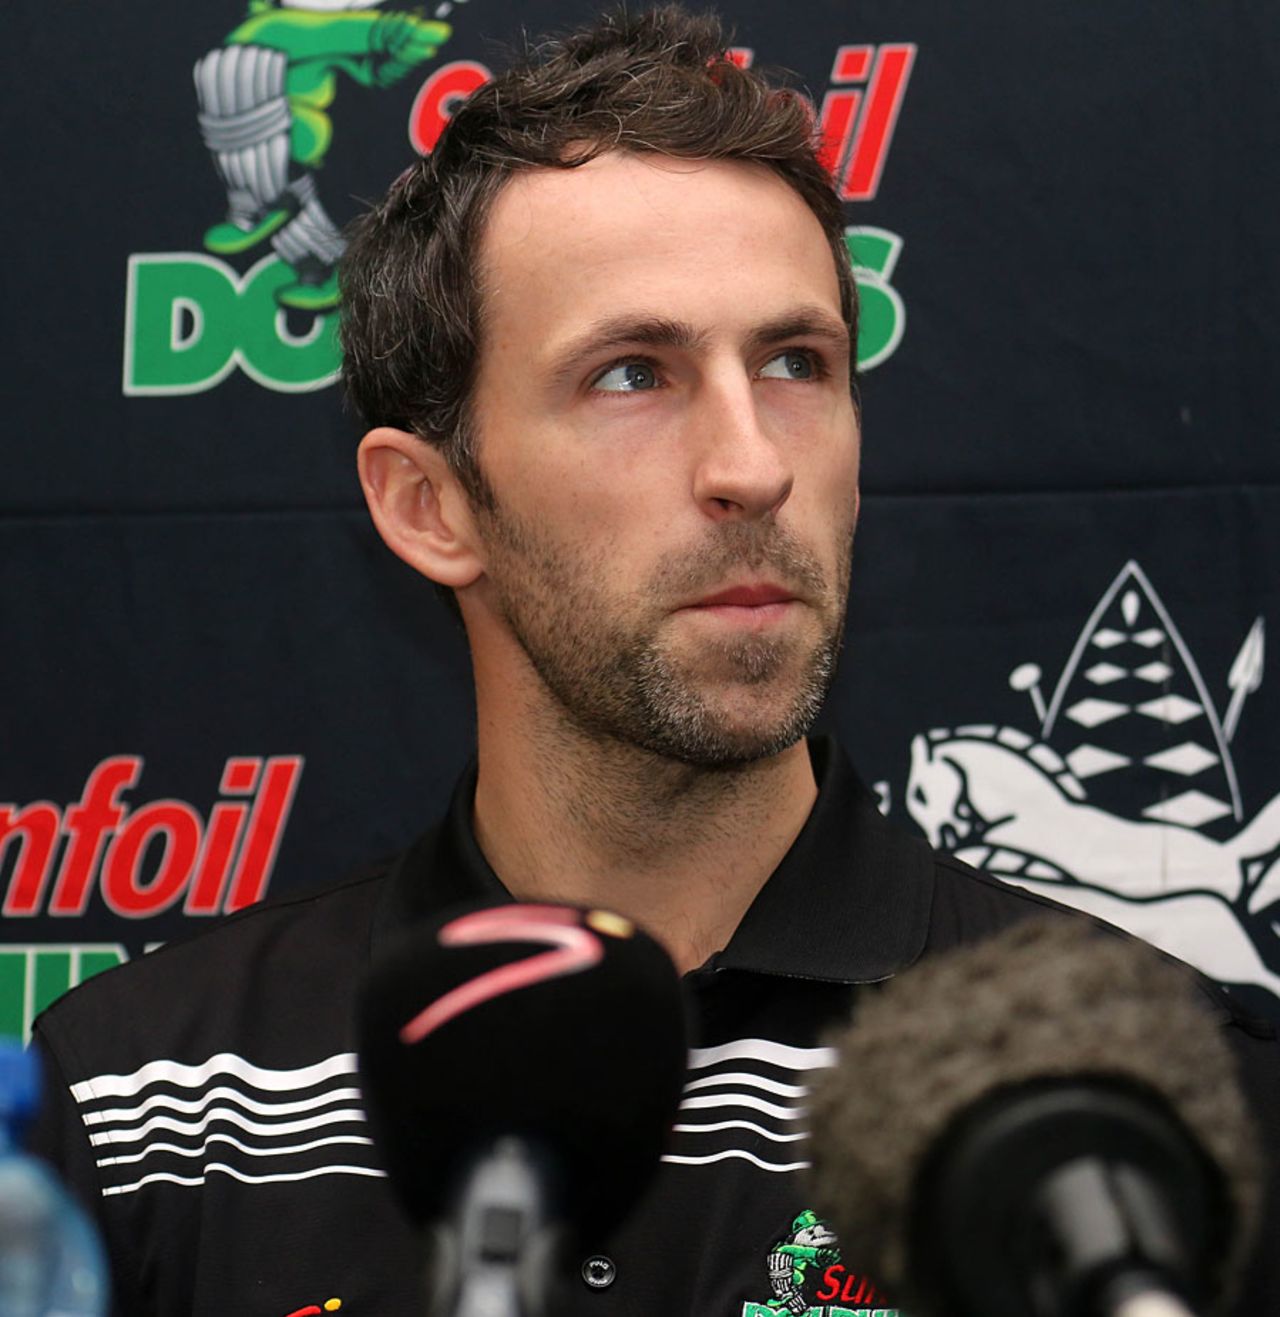 Graham Onions gives a press conference after arriving for his stint with Dolphins, Durban, October 23, 2013